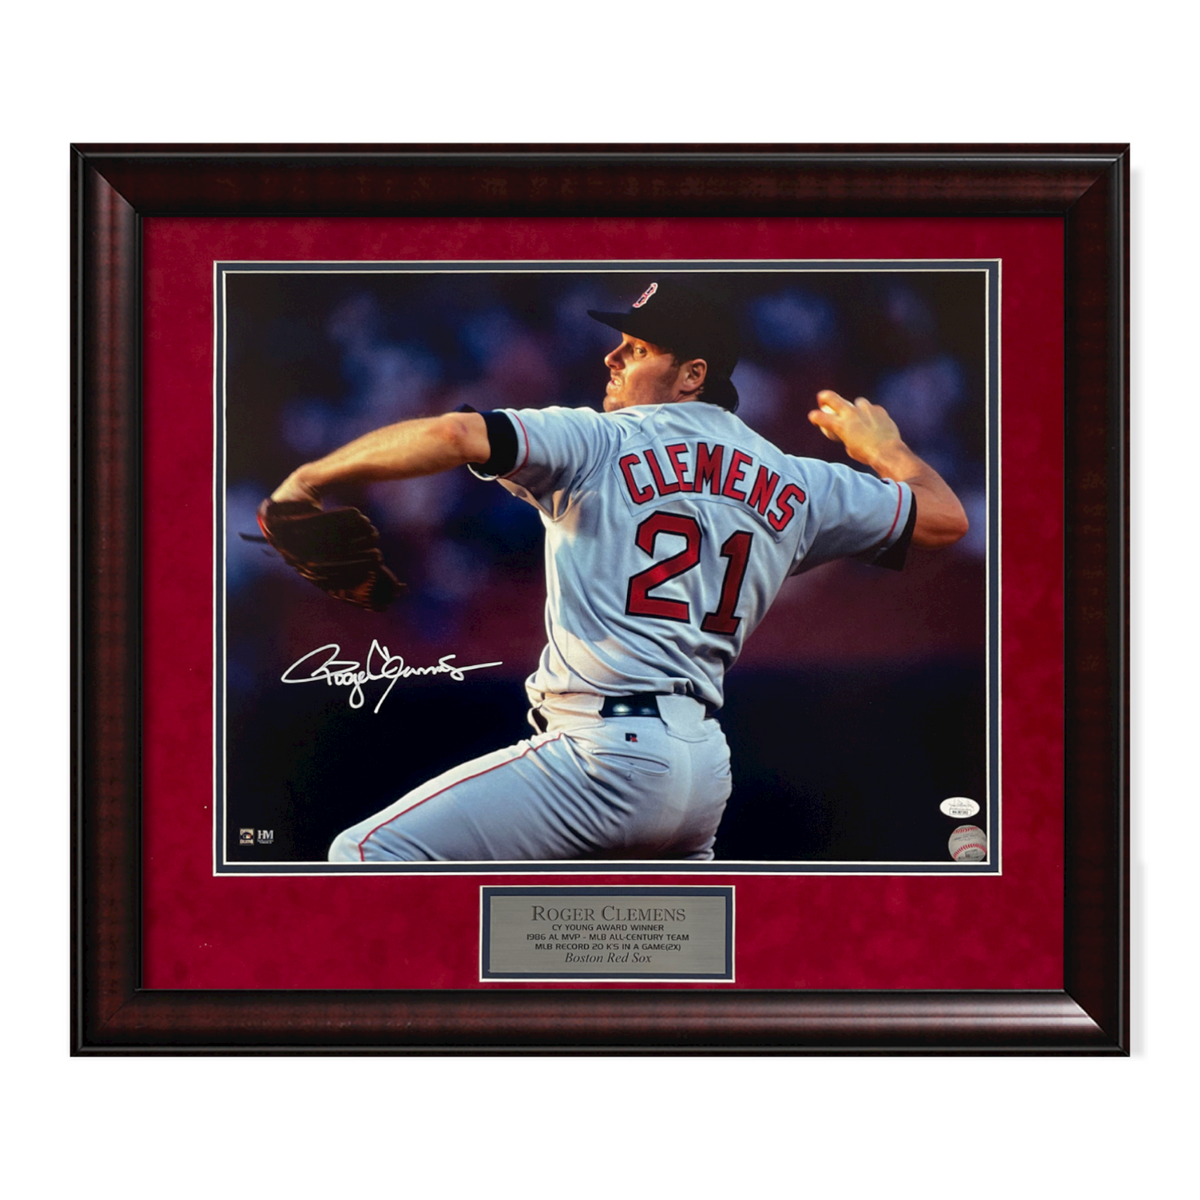 Roger Clemens Autographed Photograph Framed to 20x24 — ASG Memorabilia